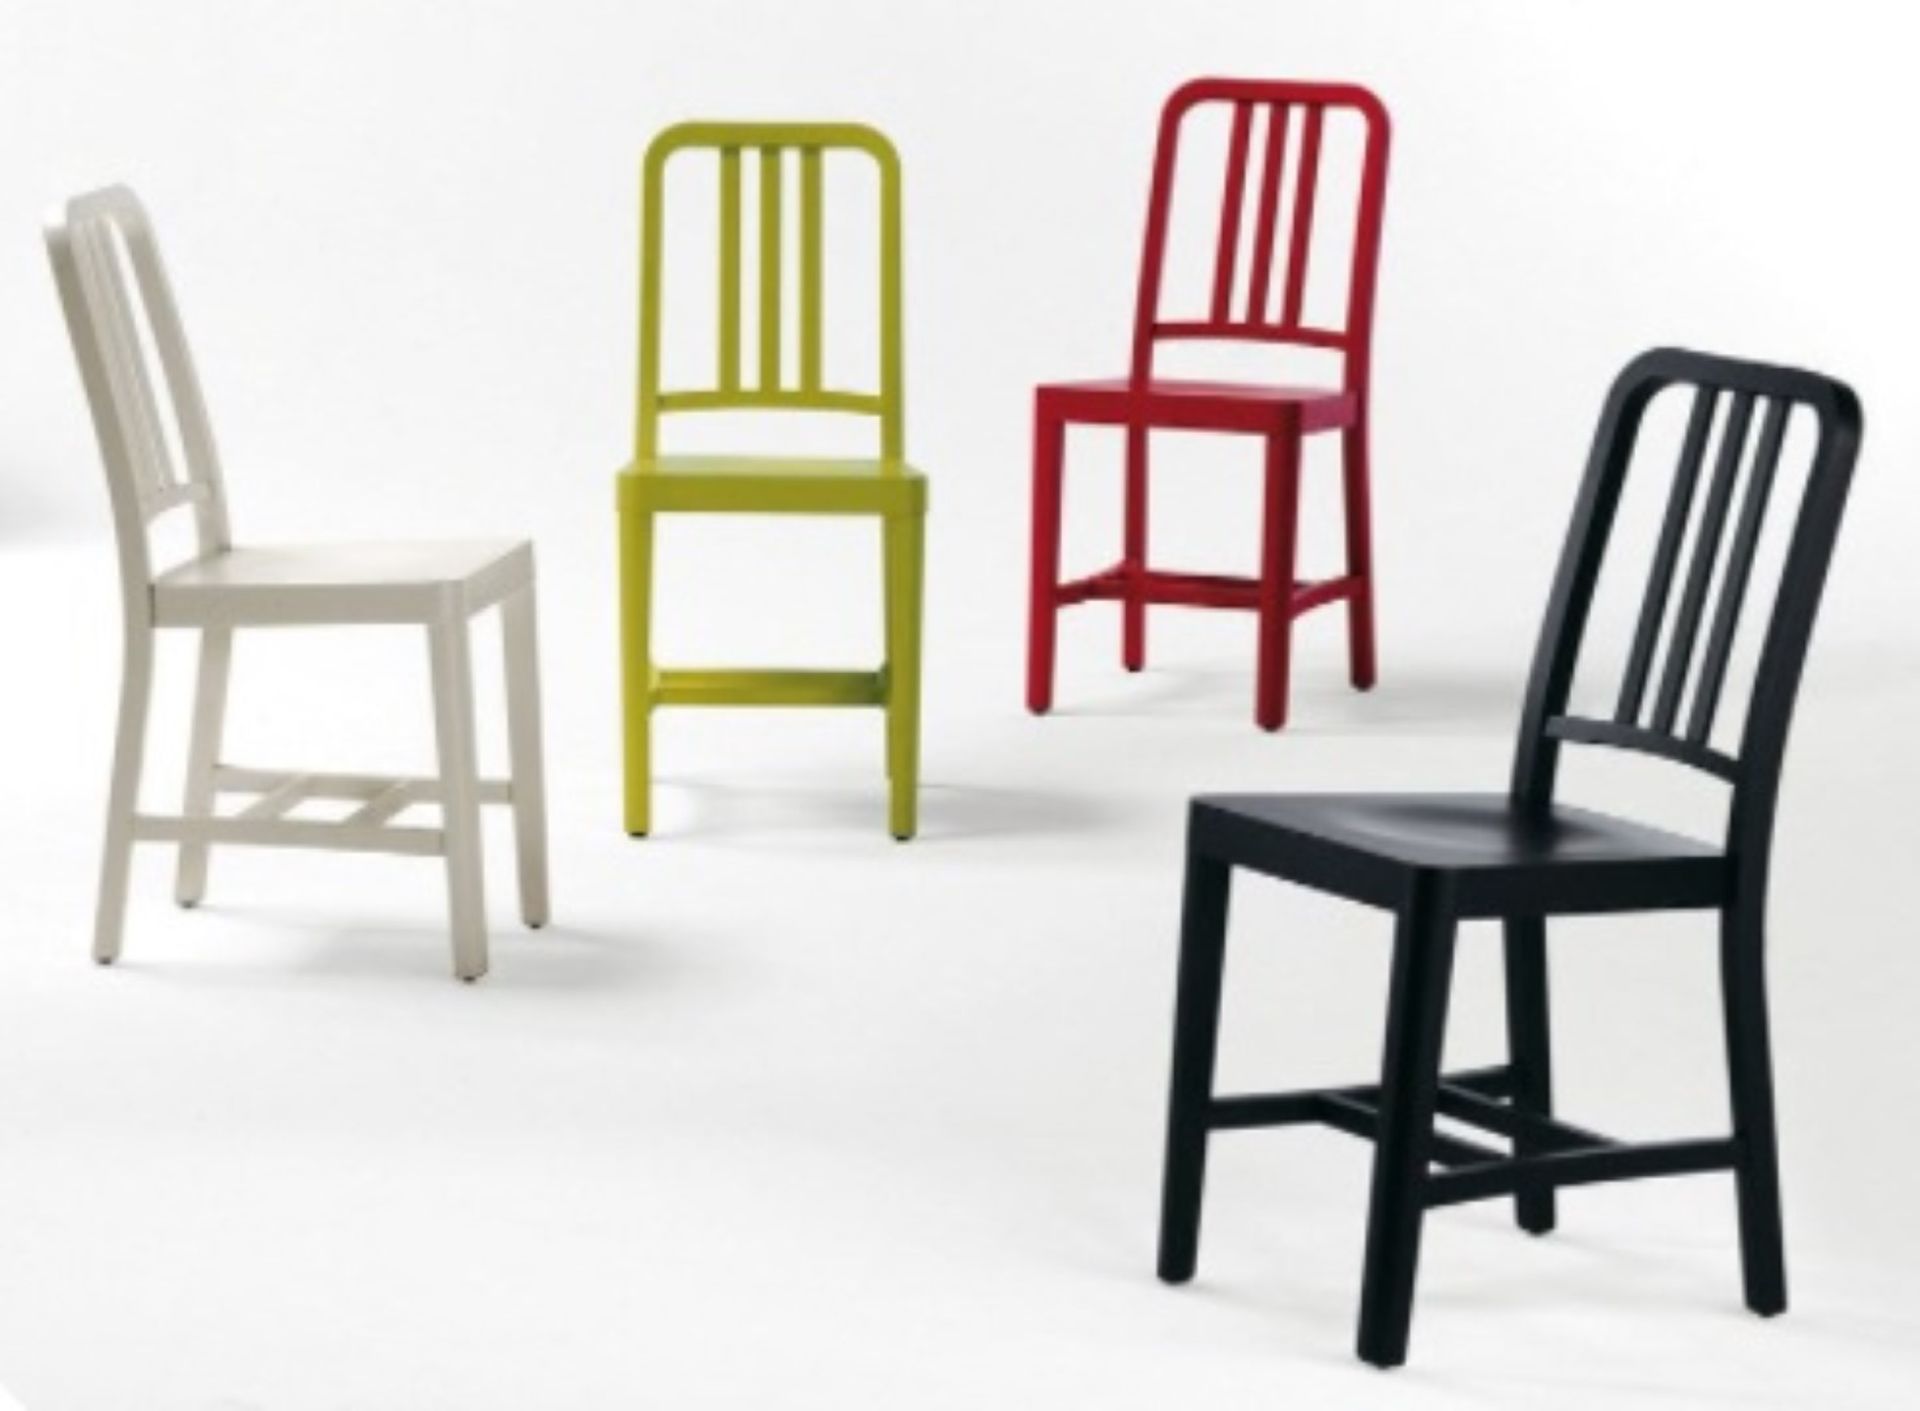 4 x Designer Billiani CO2 Contemporary Wooden Dining Chairs - Designed By Aldo Cibic - Made in Italy - Image 3 of 8